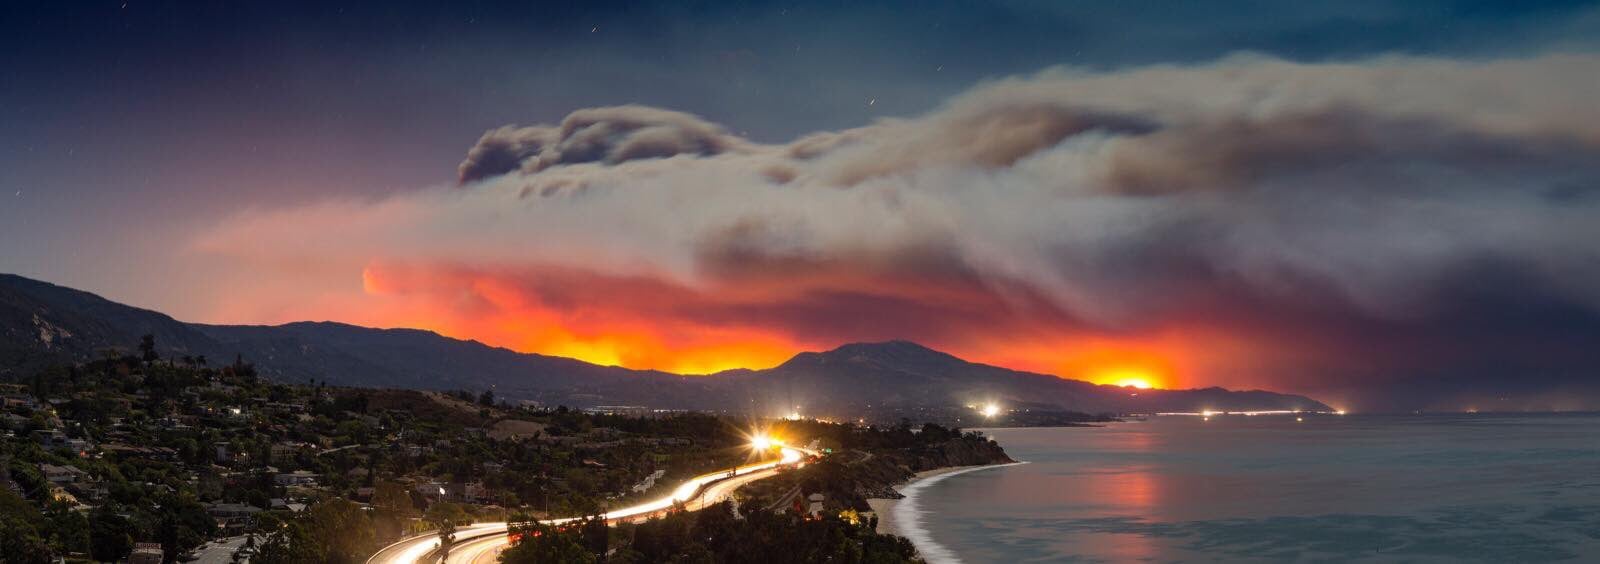 Southern California is on Fire Again - And This One Means Business